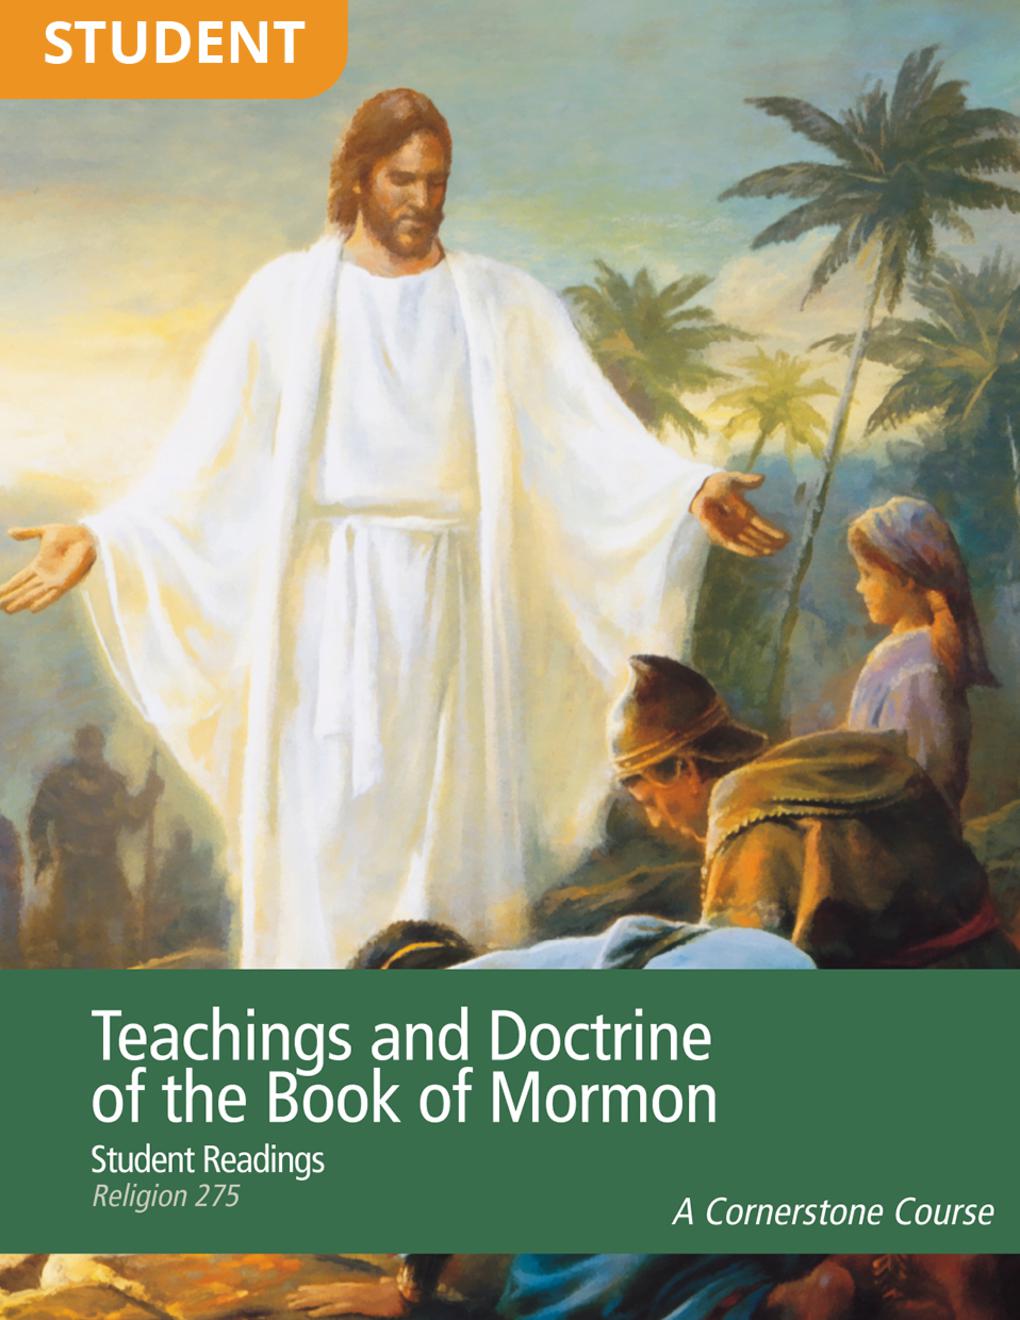 Teachings and Doctrine of the Book of Mormon Student Readings (Rel 275)